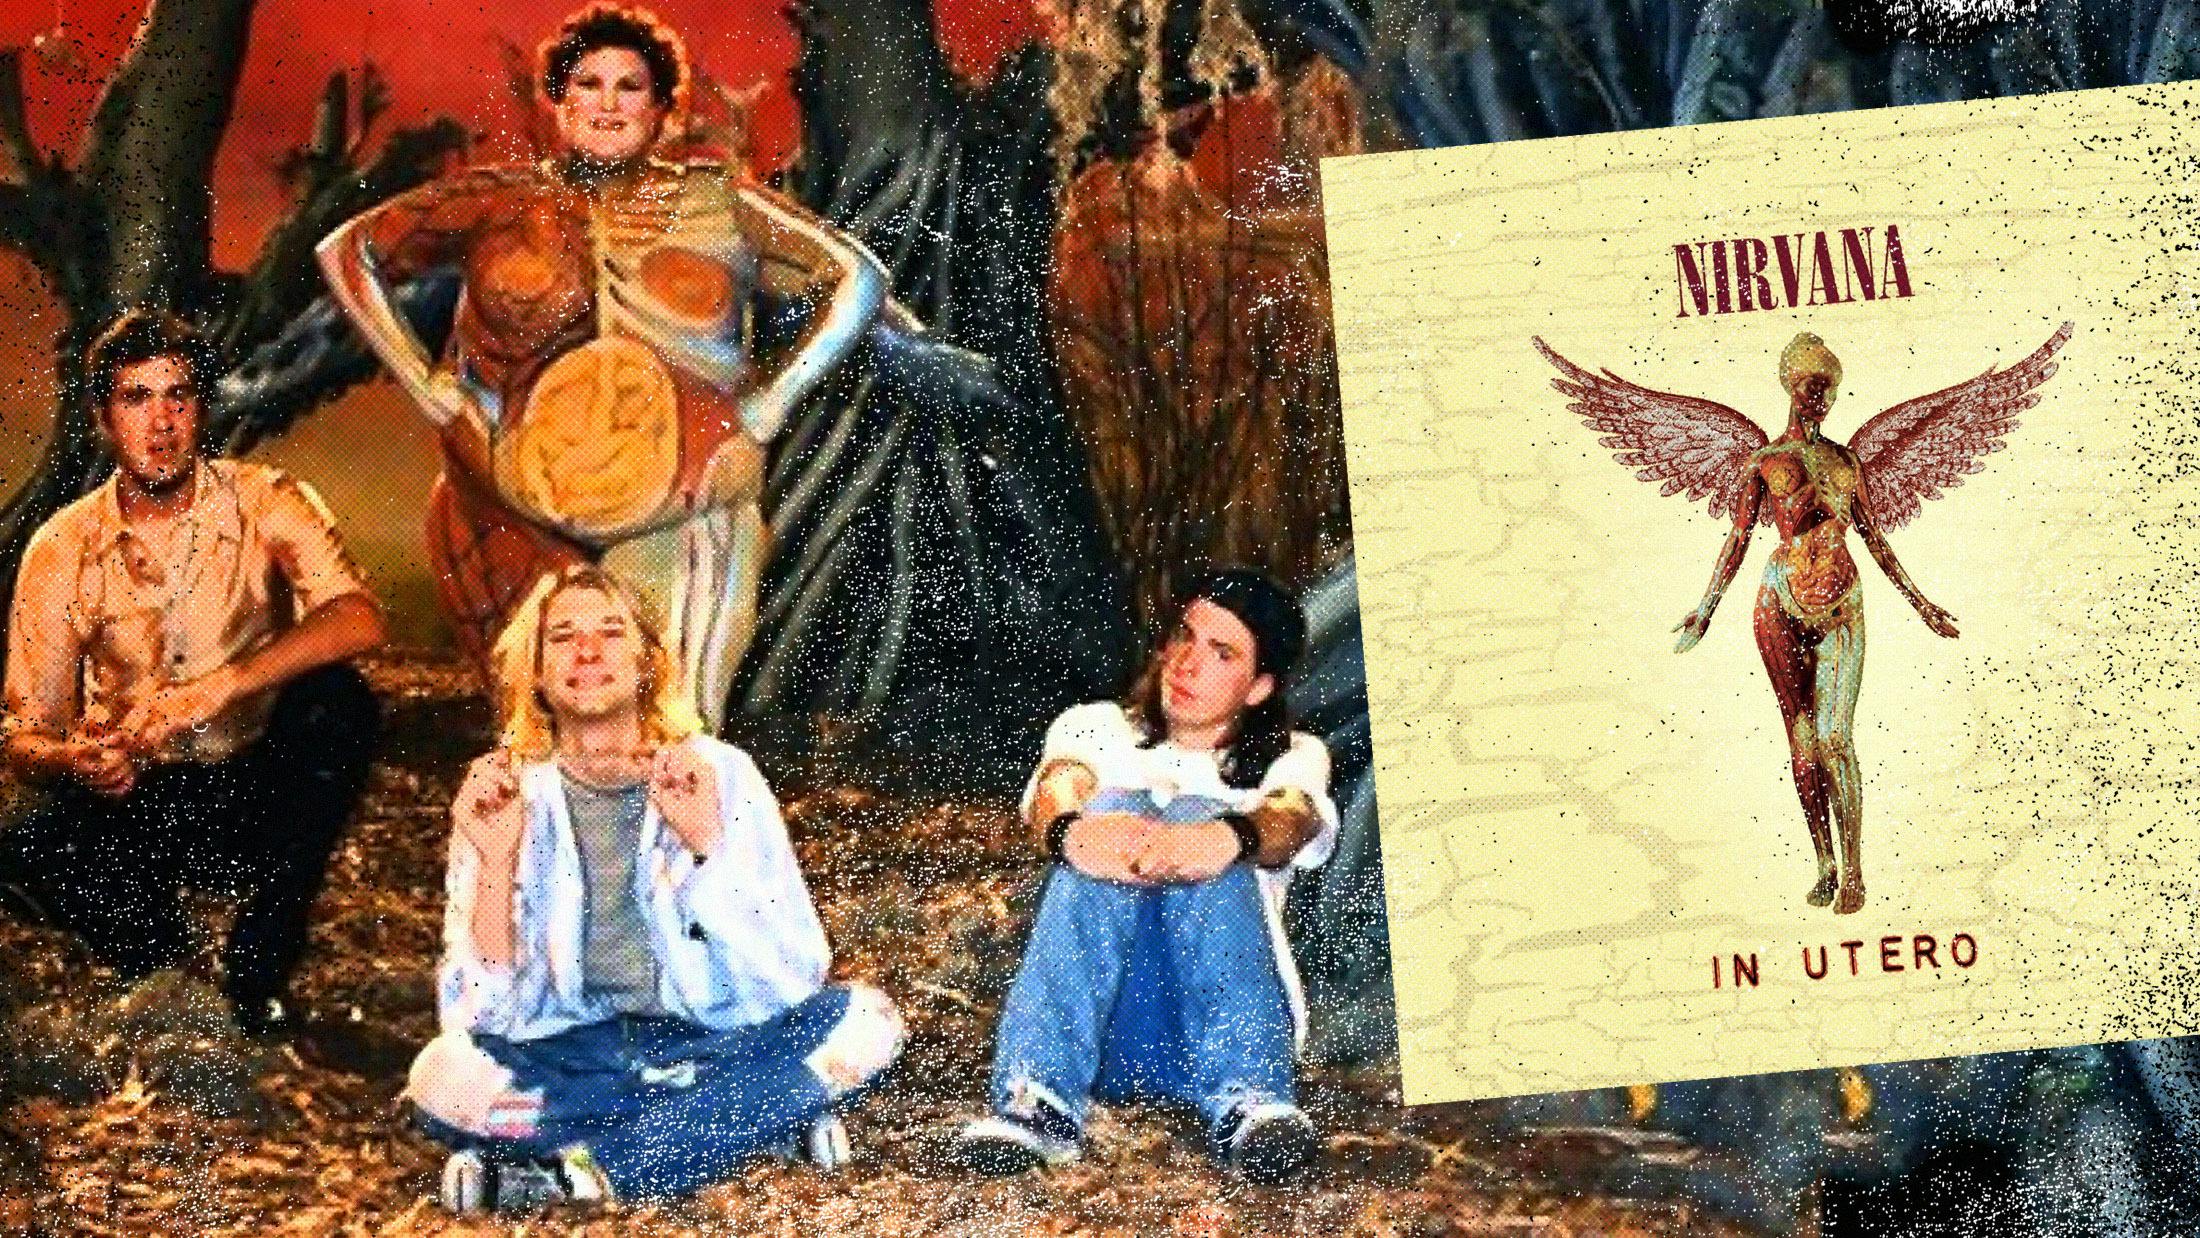 “This is the sound of absolution”: Our original 1993 review of Nirvana’s In Utero